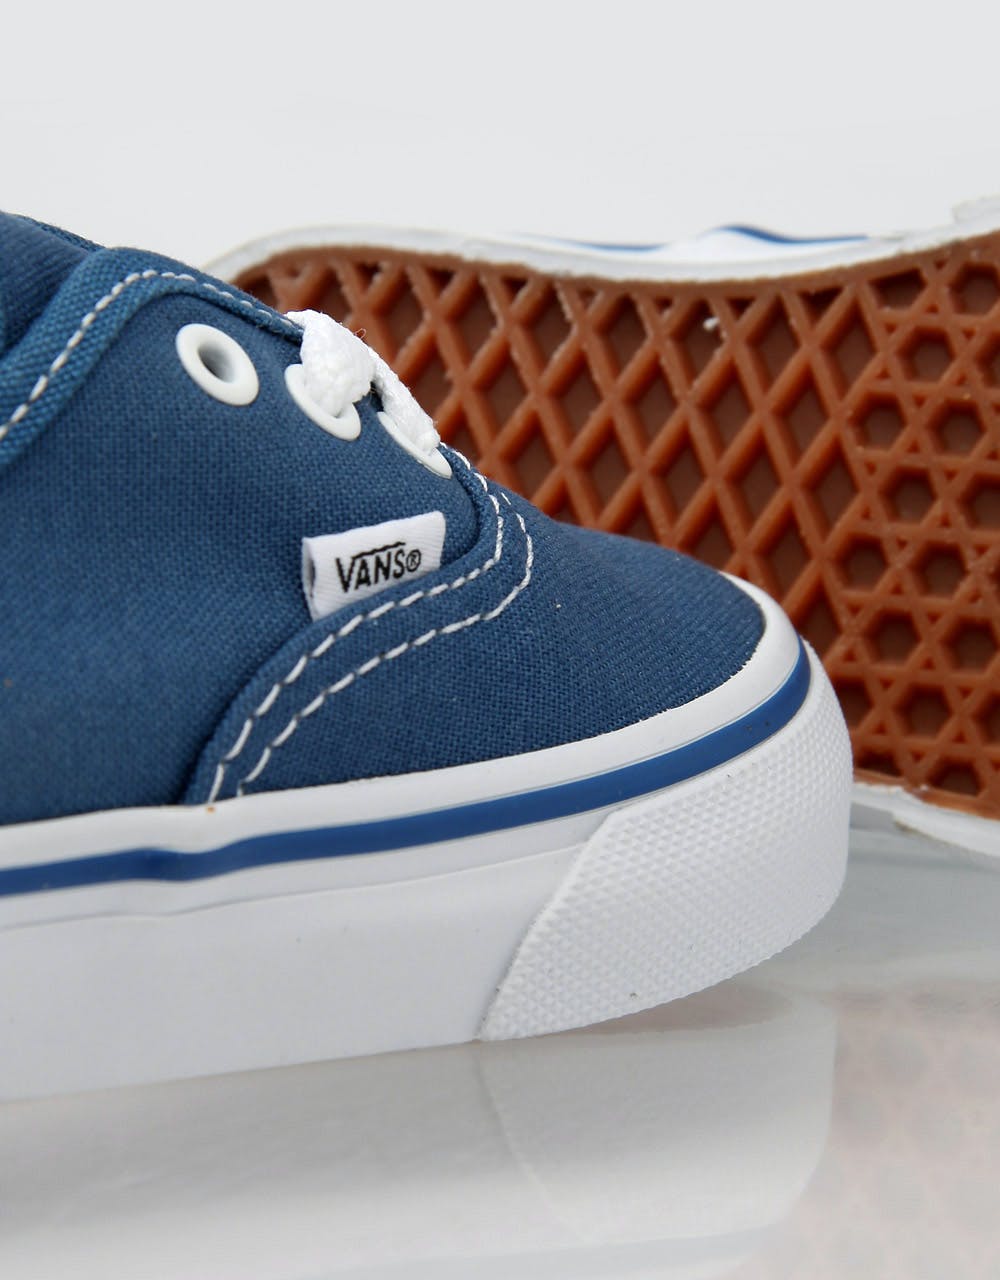 Vans Authentic Toddlers Skate Shoes - Navy